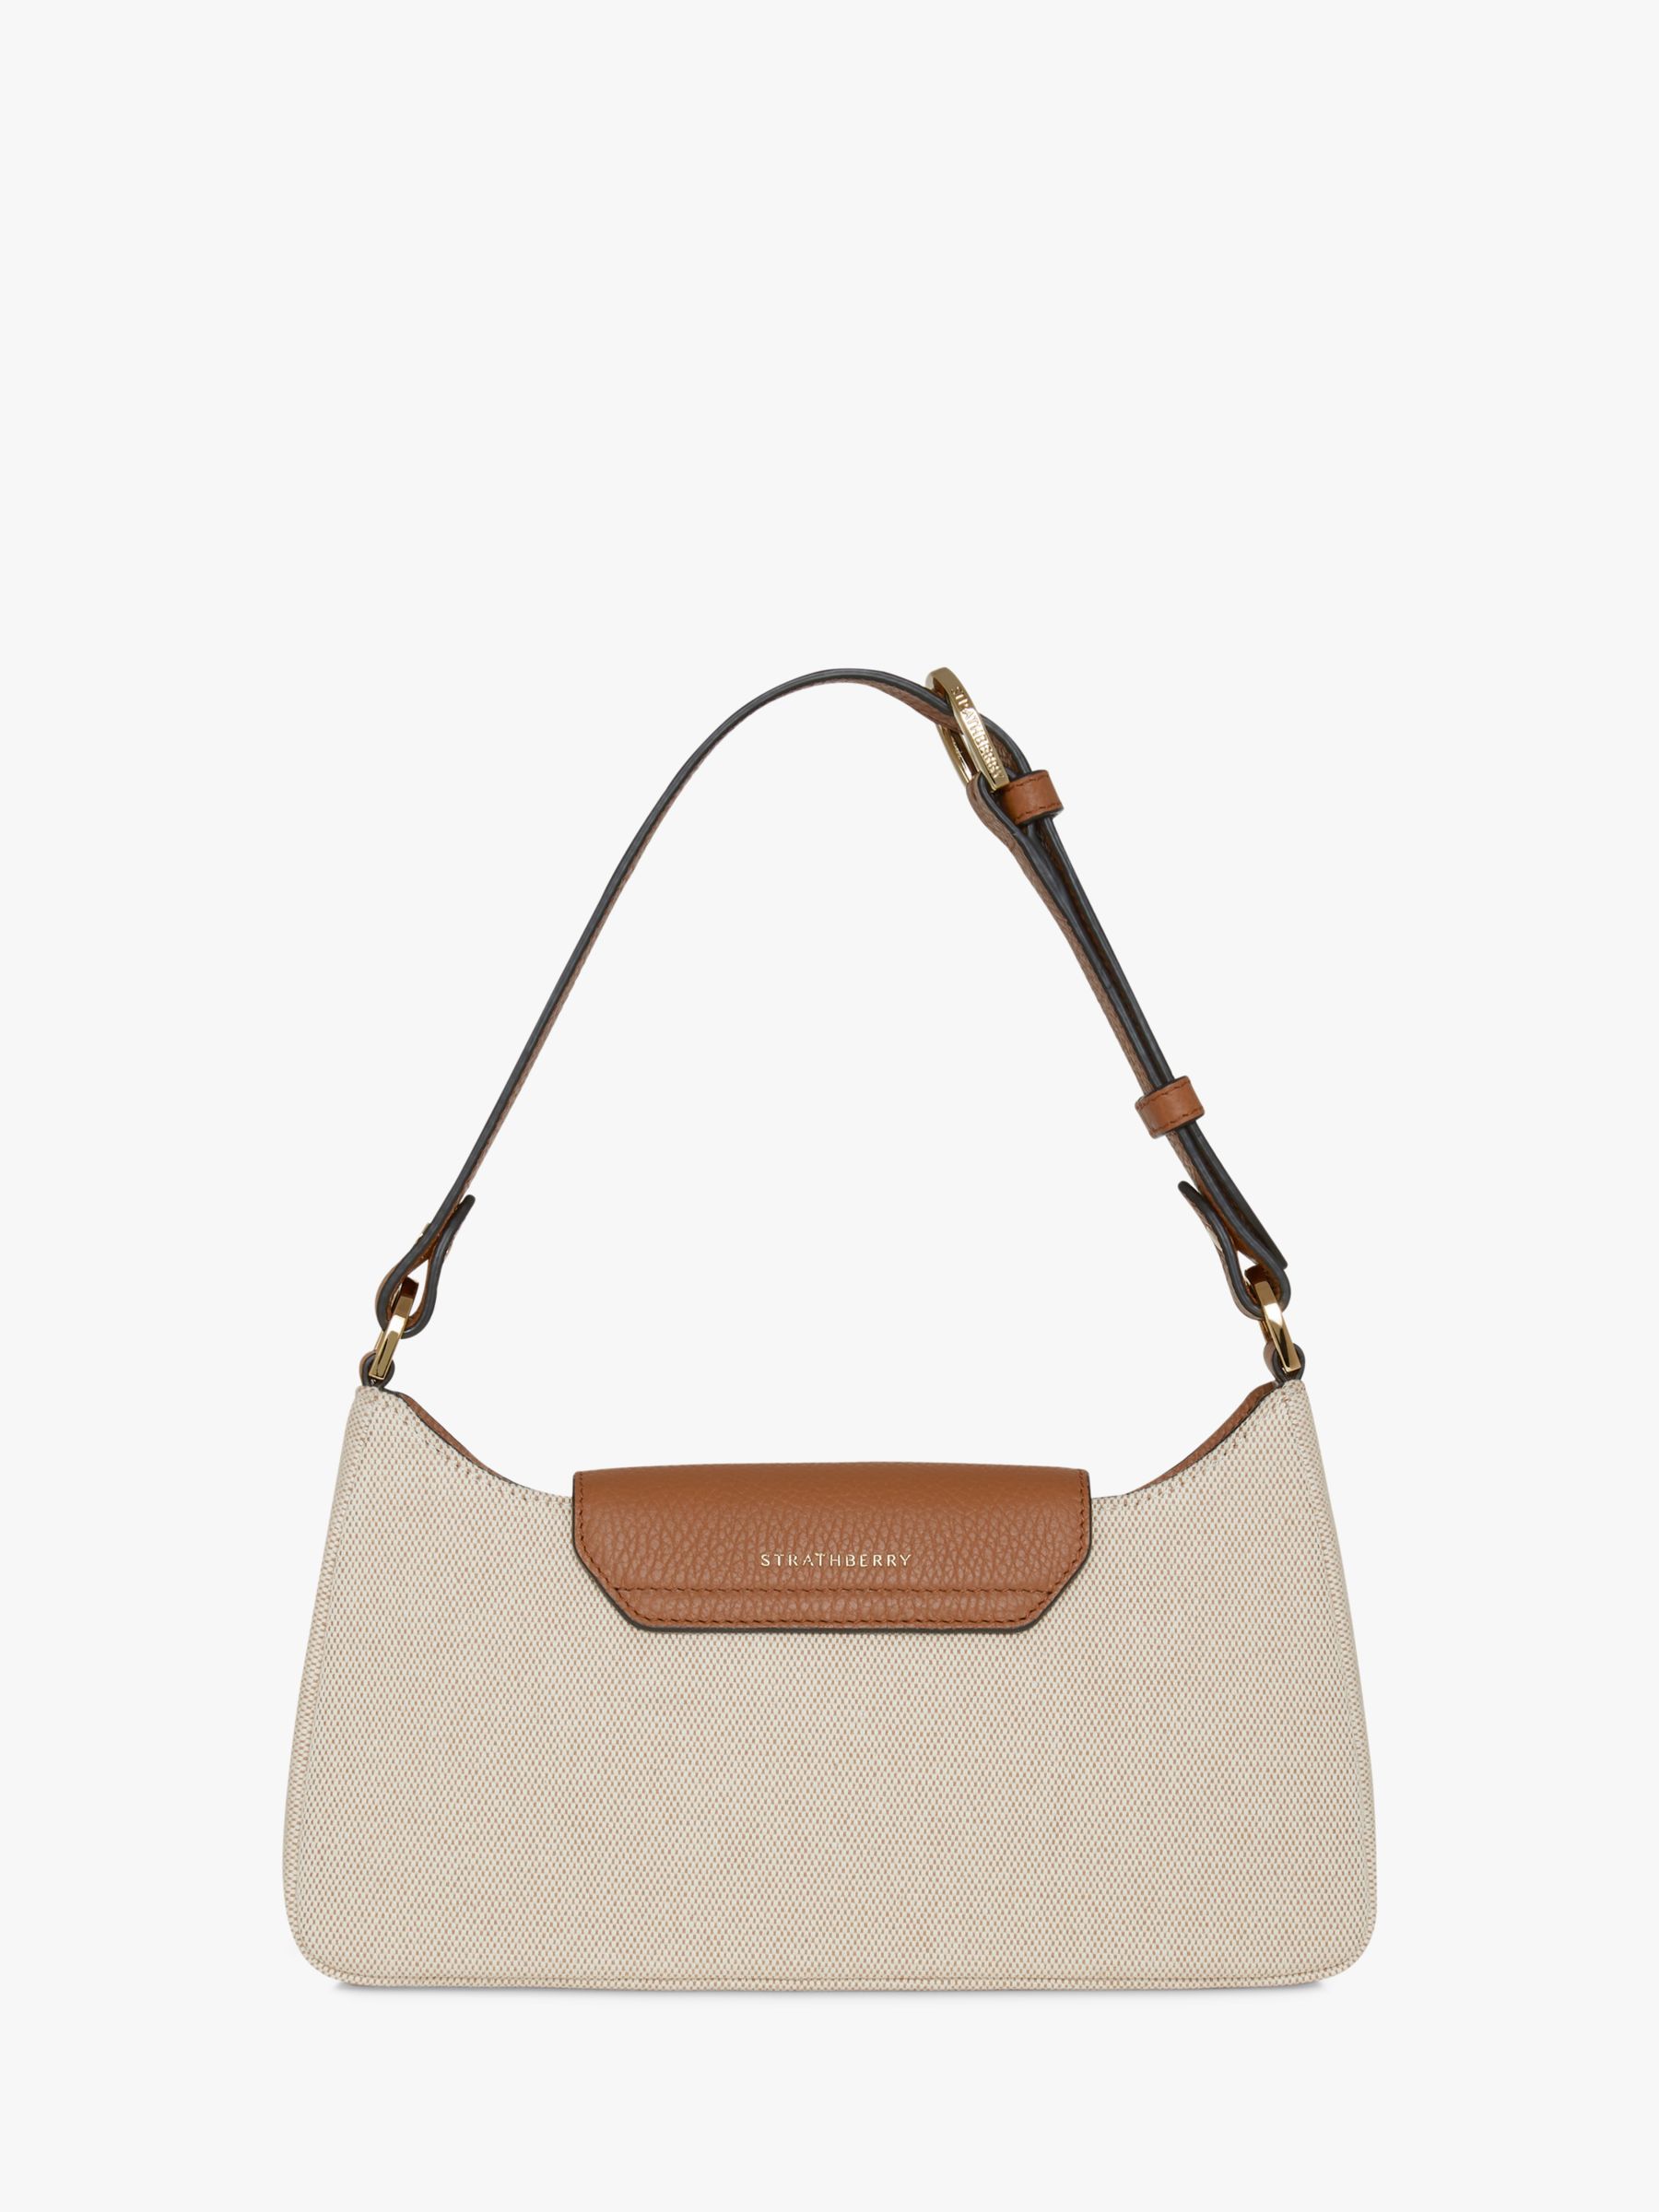 Buy Strathberry Multrees Omni Leather and Canvas Shoulder Bag, Ecru/Tan Online at johnlewis.com